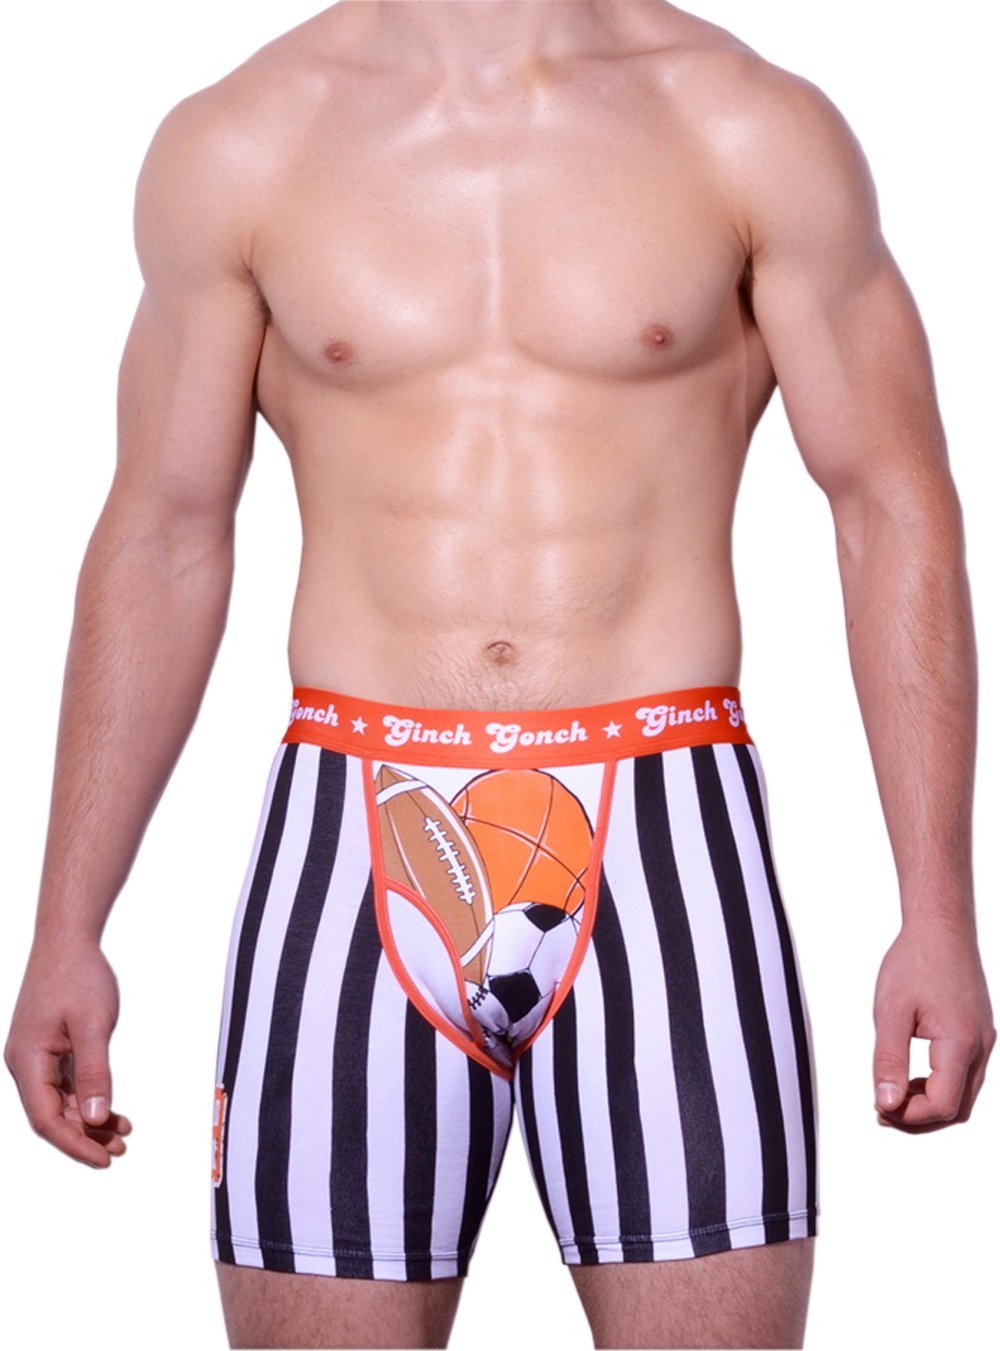 GG Ginch Gonch Score trunk y front boxer brief - men's underwear black and white vertical striped fabric with football, basketball, and soccer ball detailing, with orange printed waistband front 